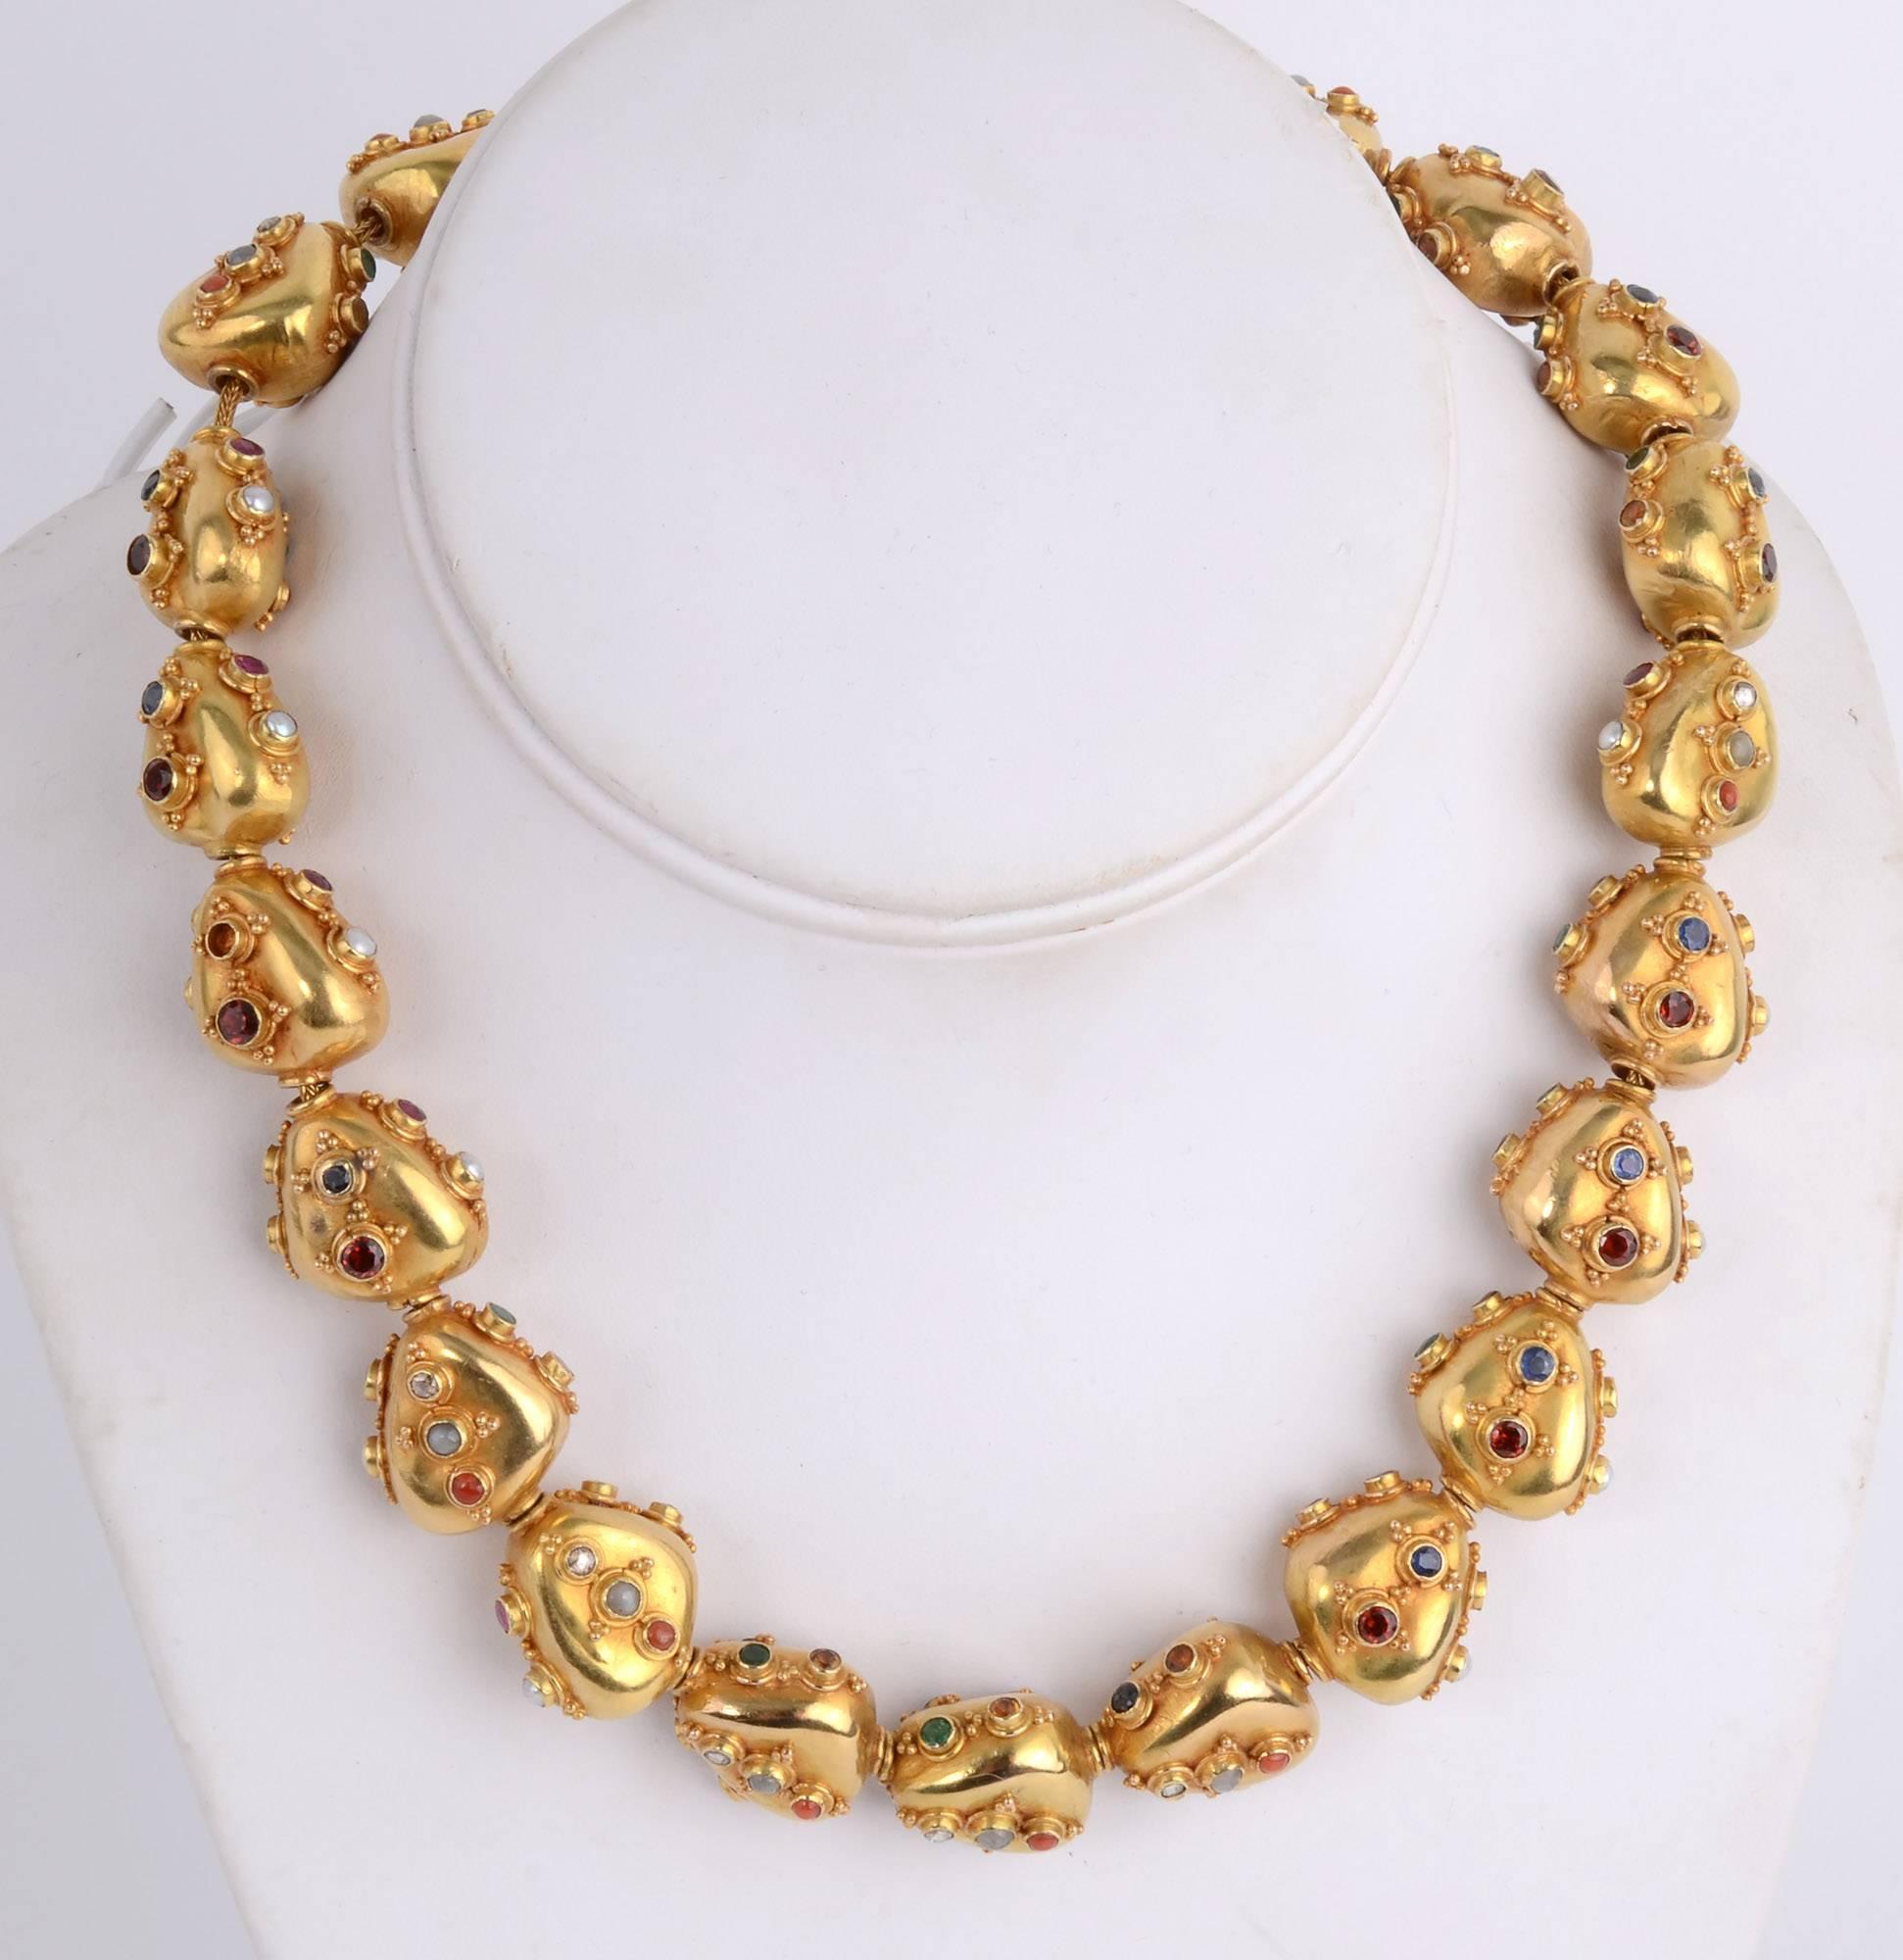 Handmade 18 karat necklace of triangular beads studded with round gem  stones that include: sapphire; coral; citrine; moonstone and pearls. Each is collet set and surrounded by tiny gold balls.  The beads are strung on a gold foxtail chain. The